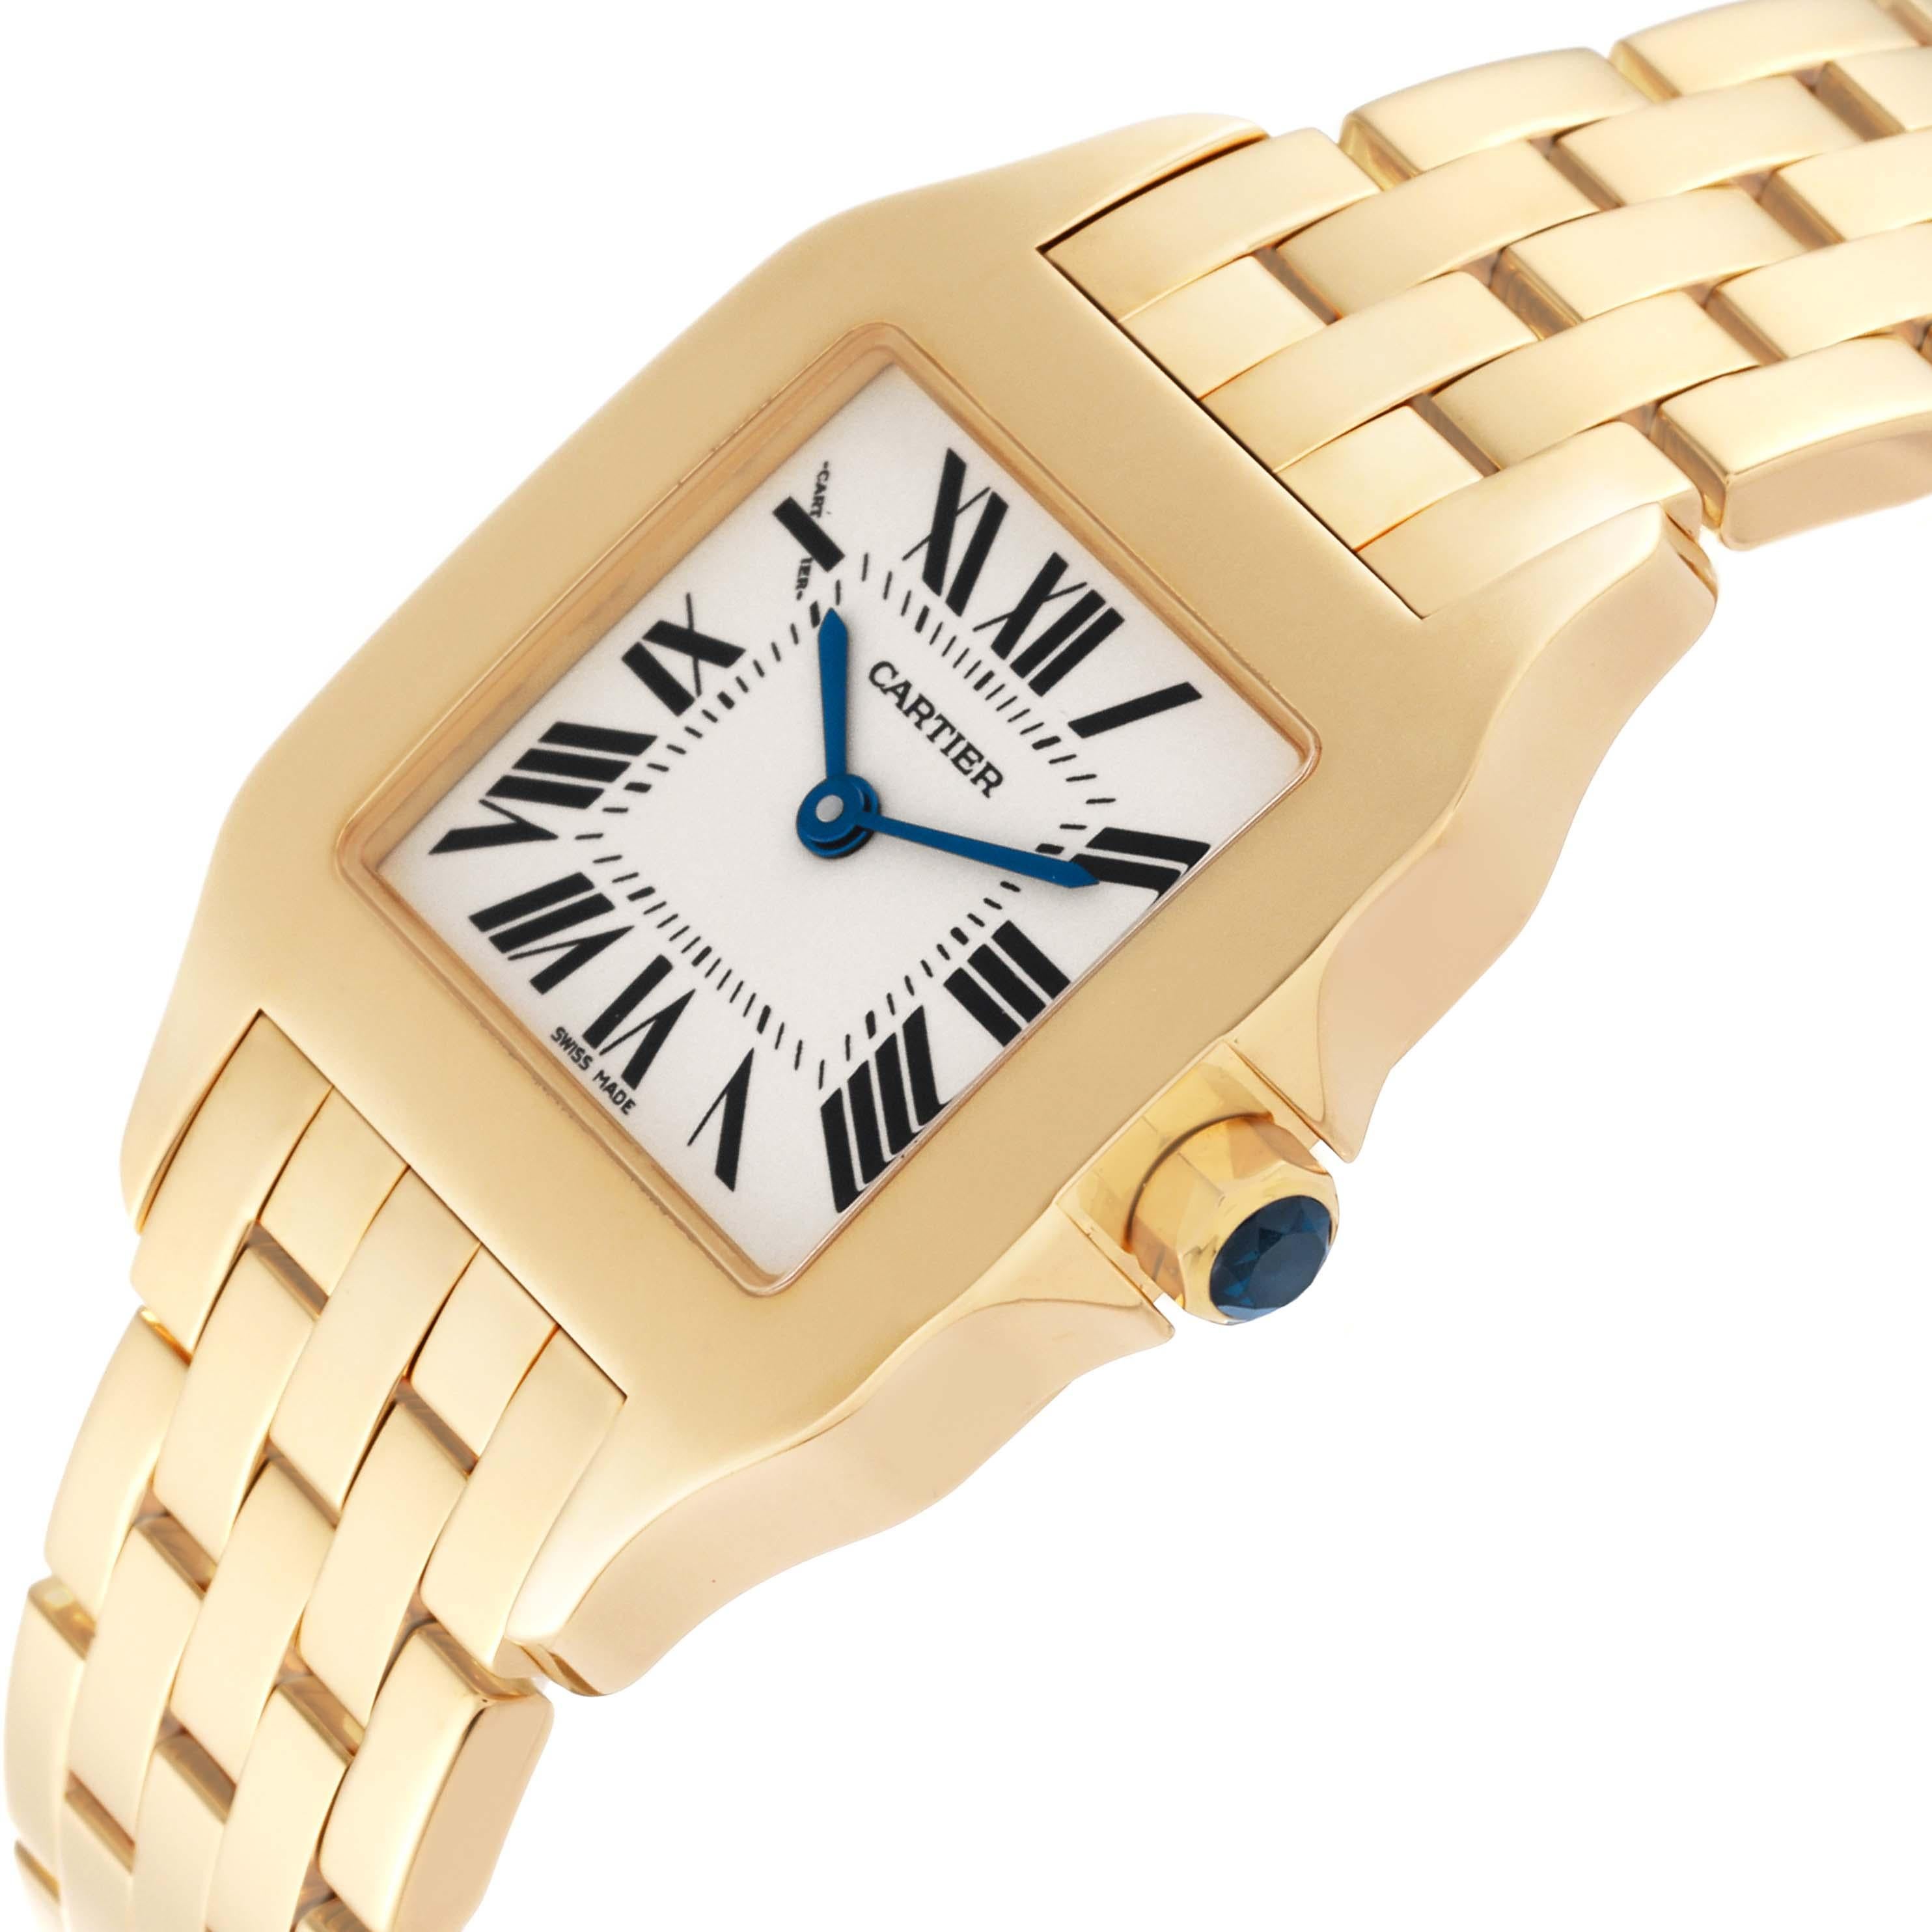 Cartier Santos Demoiselle Midsize Yellow Gold Ladies Watch W25062X9. Quartz movement. 18k yellow gold case 36.5 x 26.0 mm. Octagonal crown set with the blue faceted sapphire. . Scratch resistant sapphire crystal. Silvered grained dial with black